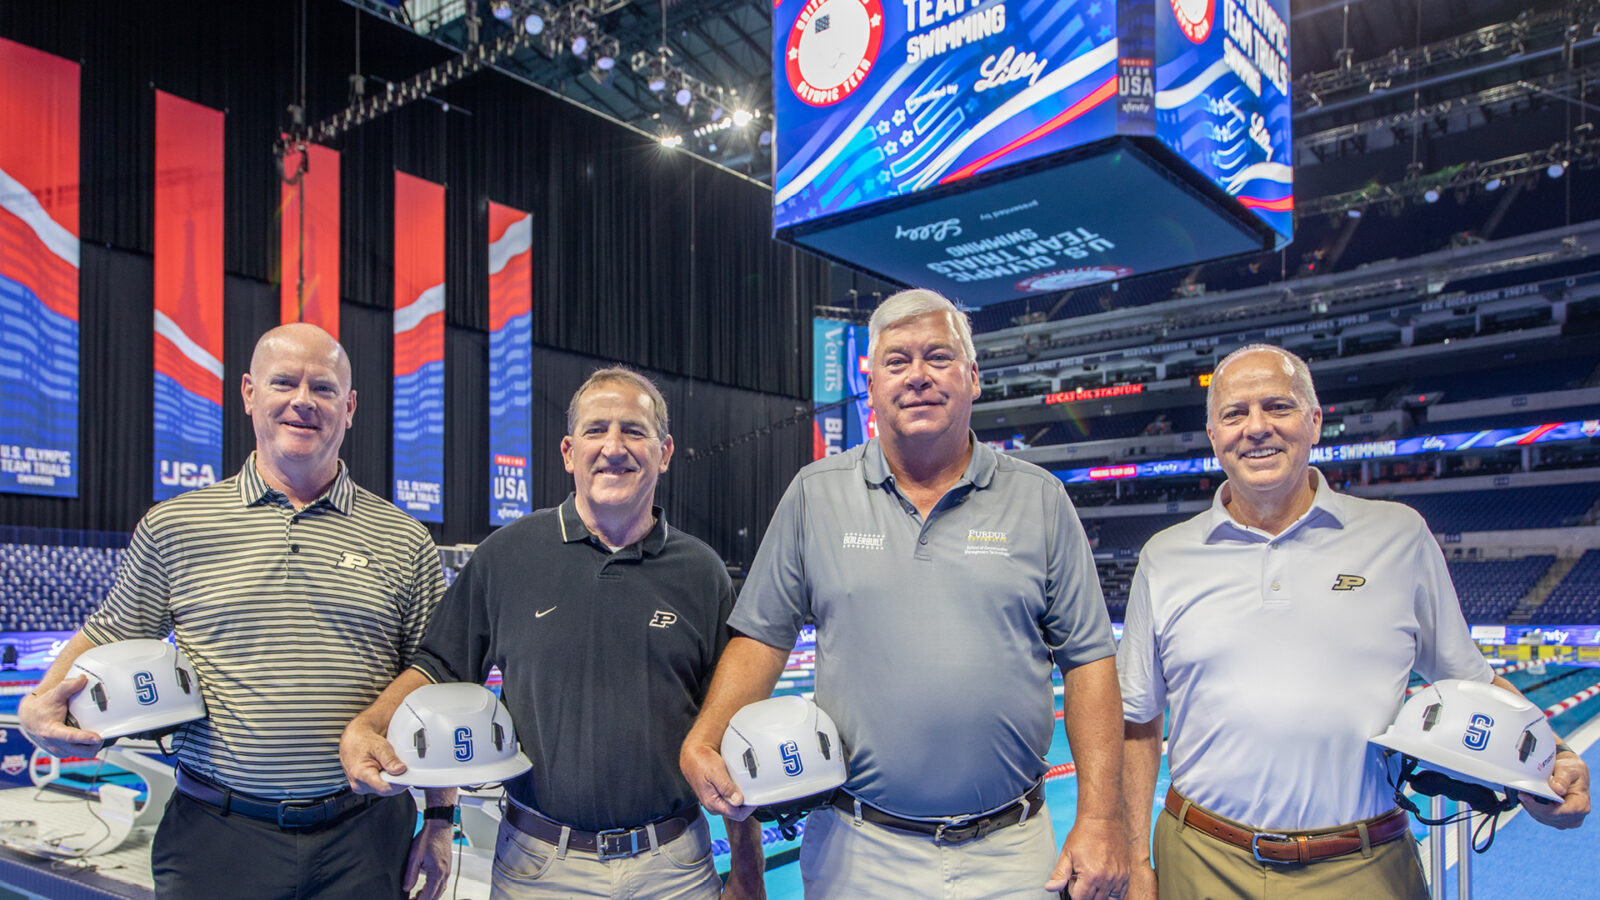 Boilermakers (from left to right) Nathan Moore, Dave Burchard, Tony Eisenhut and Mike Dilts are part of the Shiel Sexton team organizing the building of two Olympic swimming pools inside Lucas Oil Stadium. (Photo courtesy of Megan Ratts Photography, LLC)